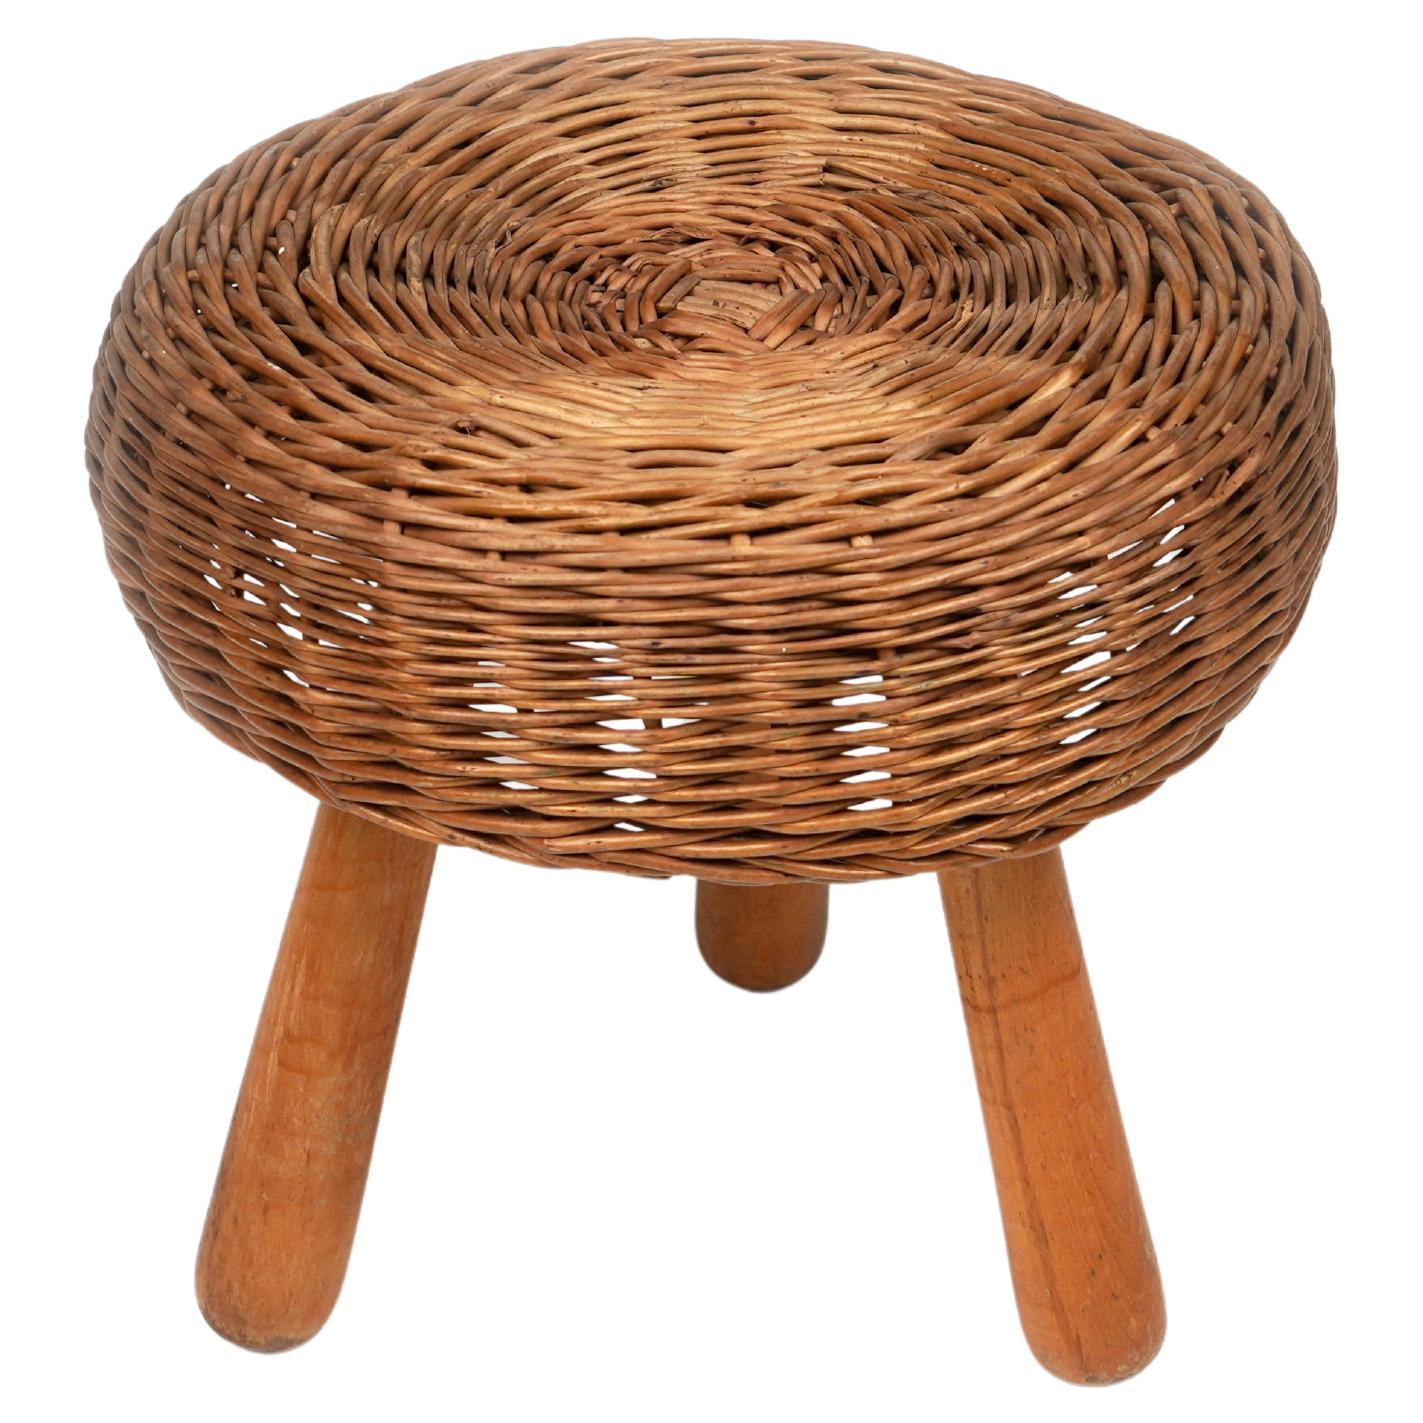 Mid-20th Century Midcentury Wicker and Wood Tripod Stool by Tony Paul, United States, 1950s For Sale